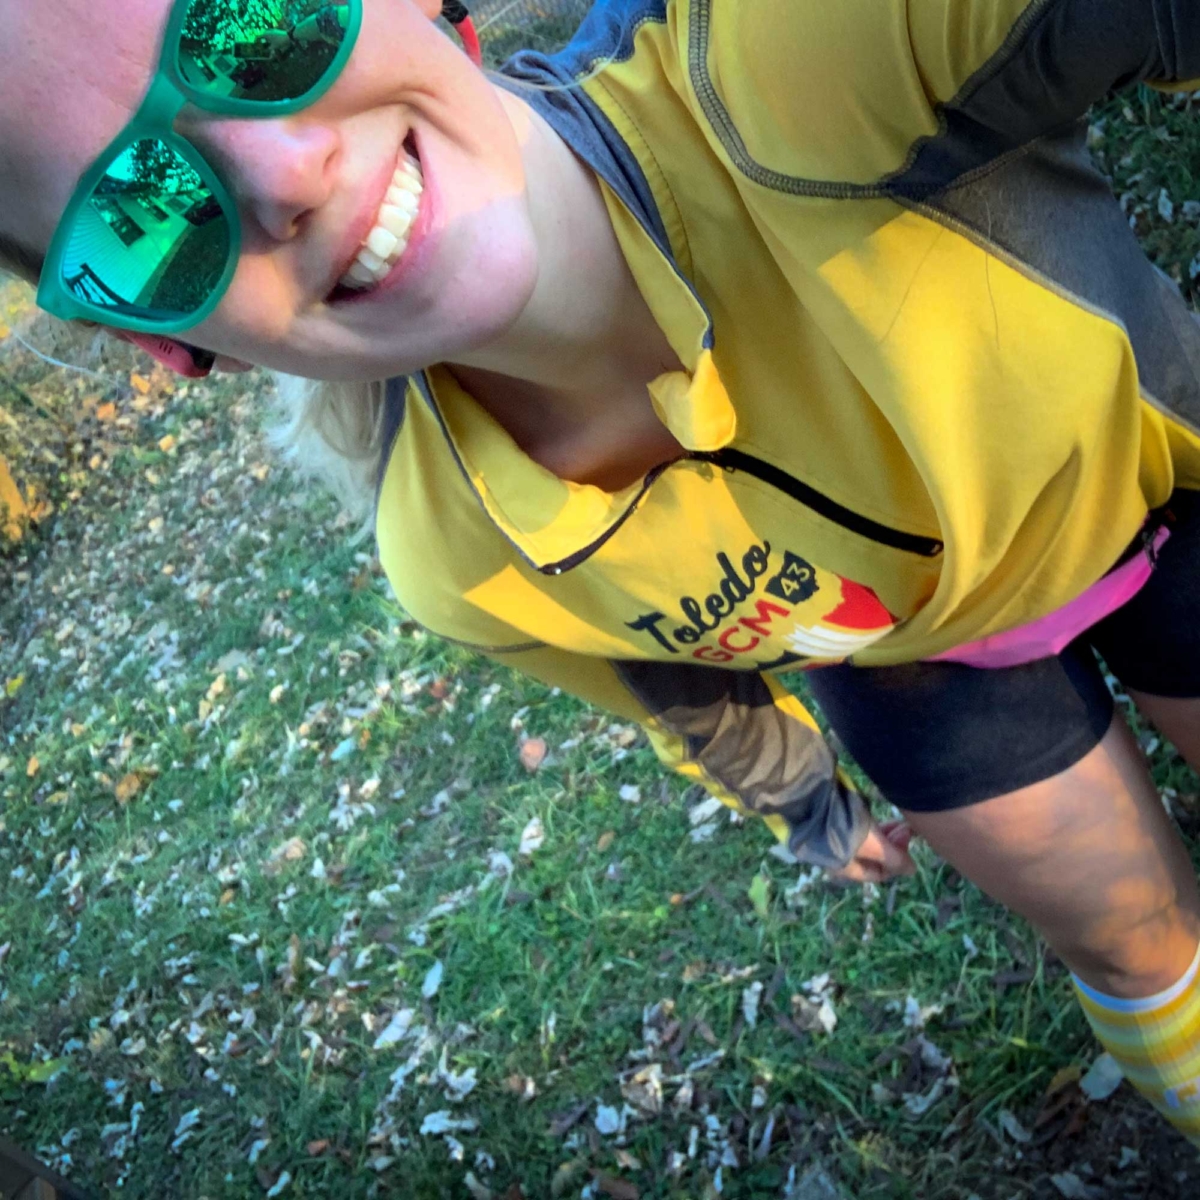 Running fun races and improving myself. I have a goal to run at least a 15k, half, full or ultra in every state. I also would like to eventually run all the world majors (I have done Chicago in 2018 and am doing Berlin 2023). I also enjoy running for fun on new to me rail to trails and in new cities.